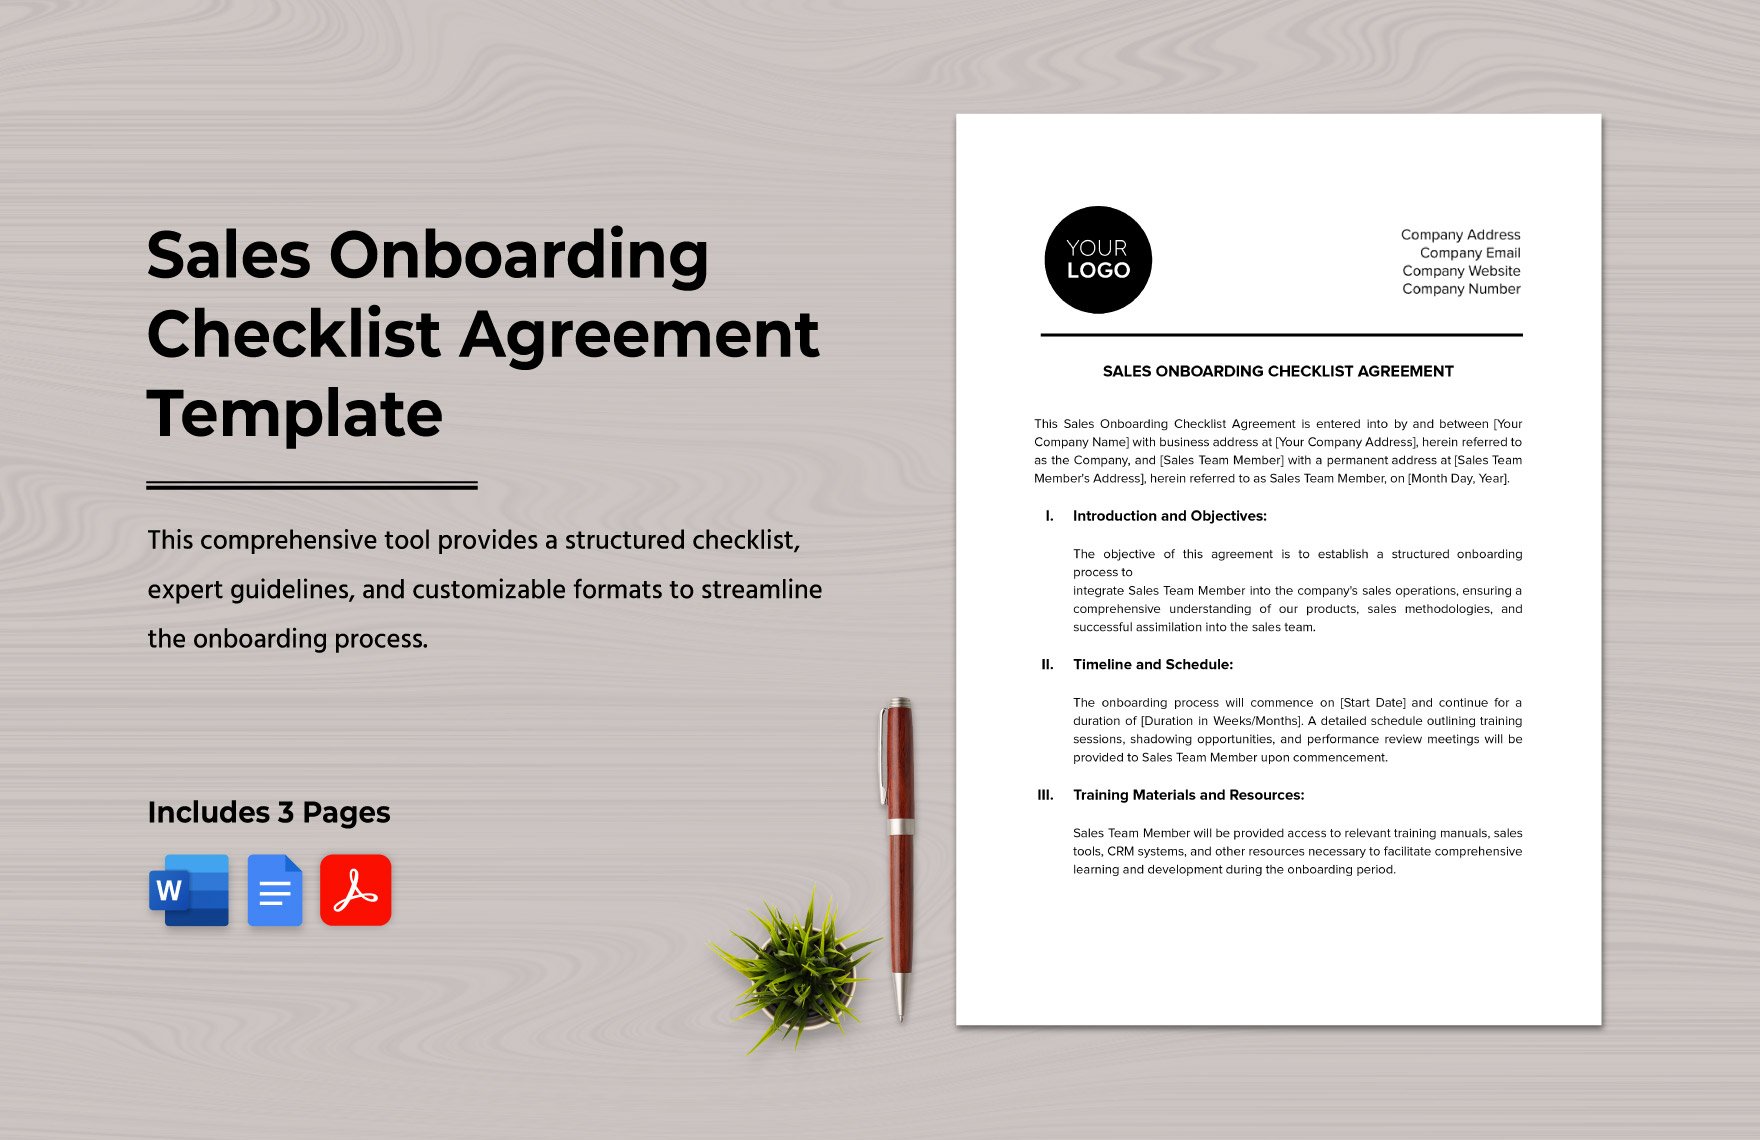 Sales Onboarding Checklist Agreement Template